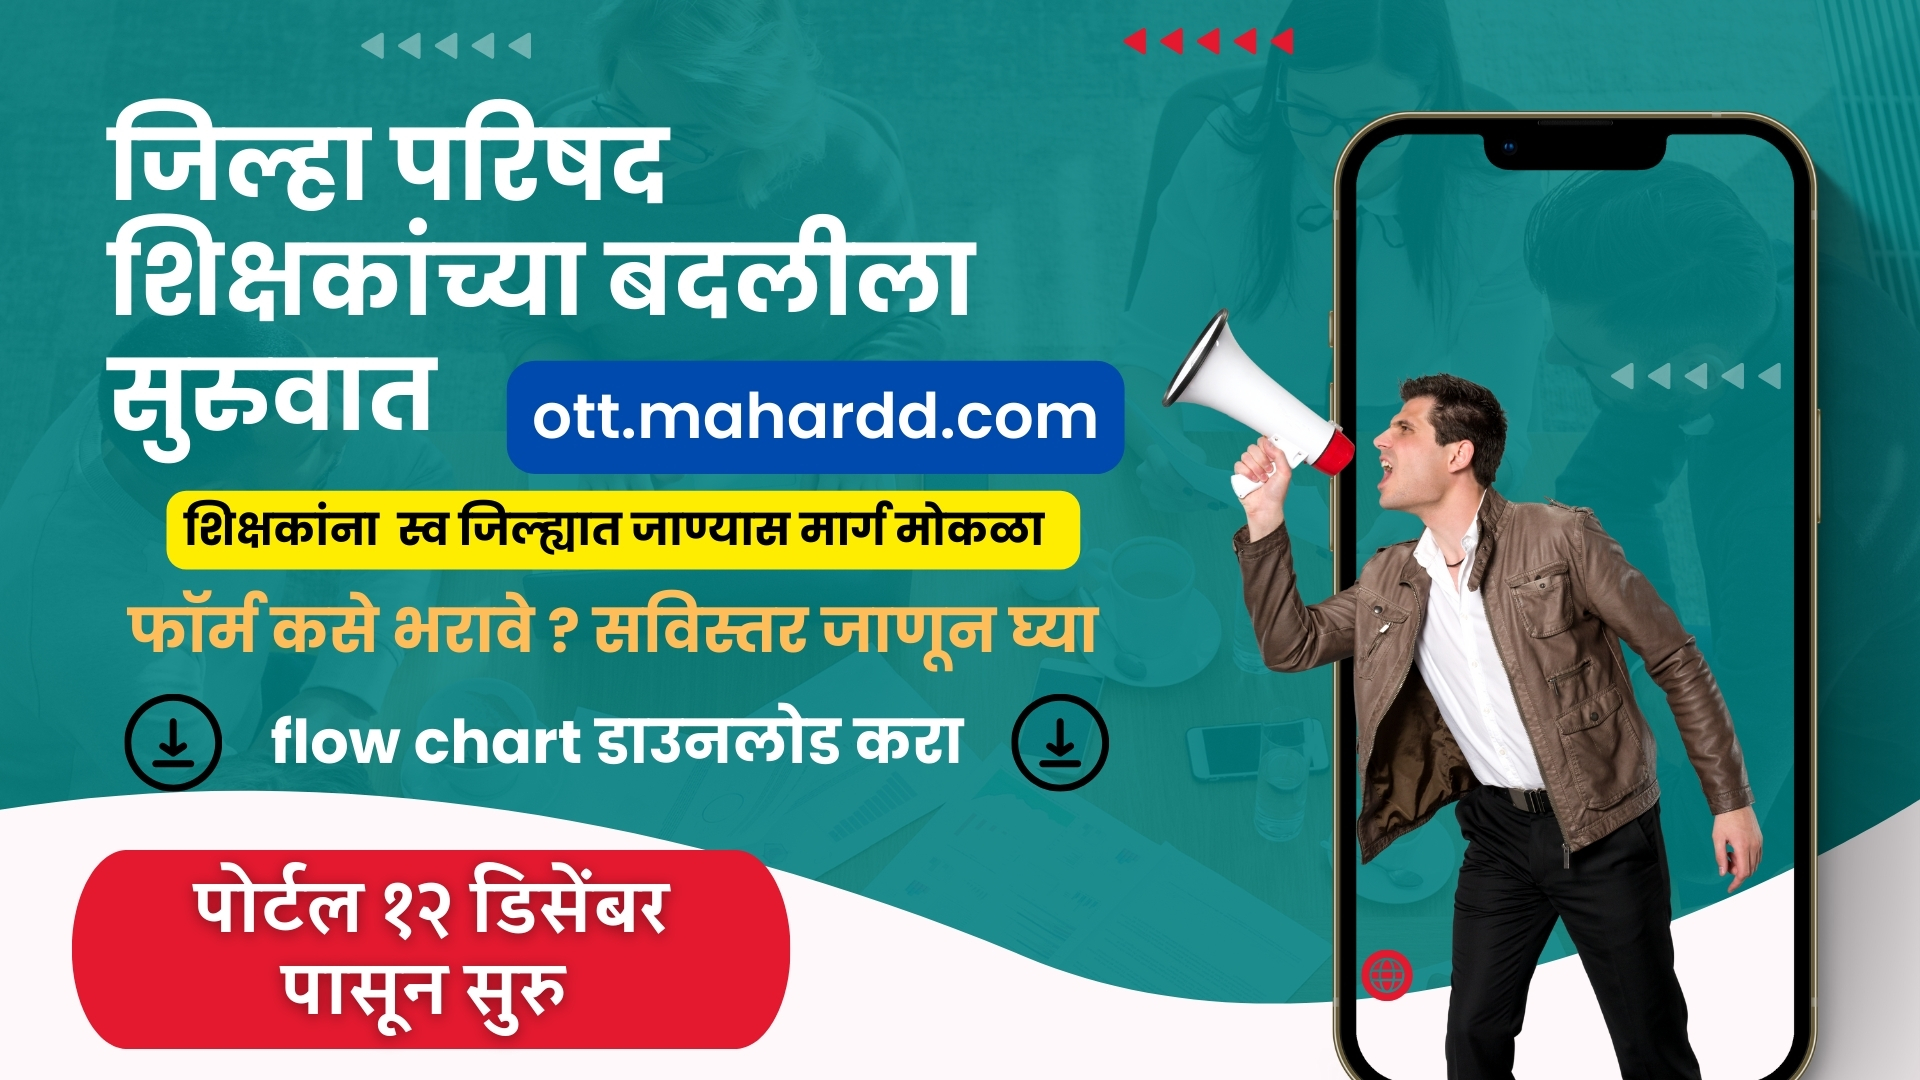 The transfer of Zilla Parishad teachers has started from 12th to 15 December on ottmahardd.com